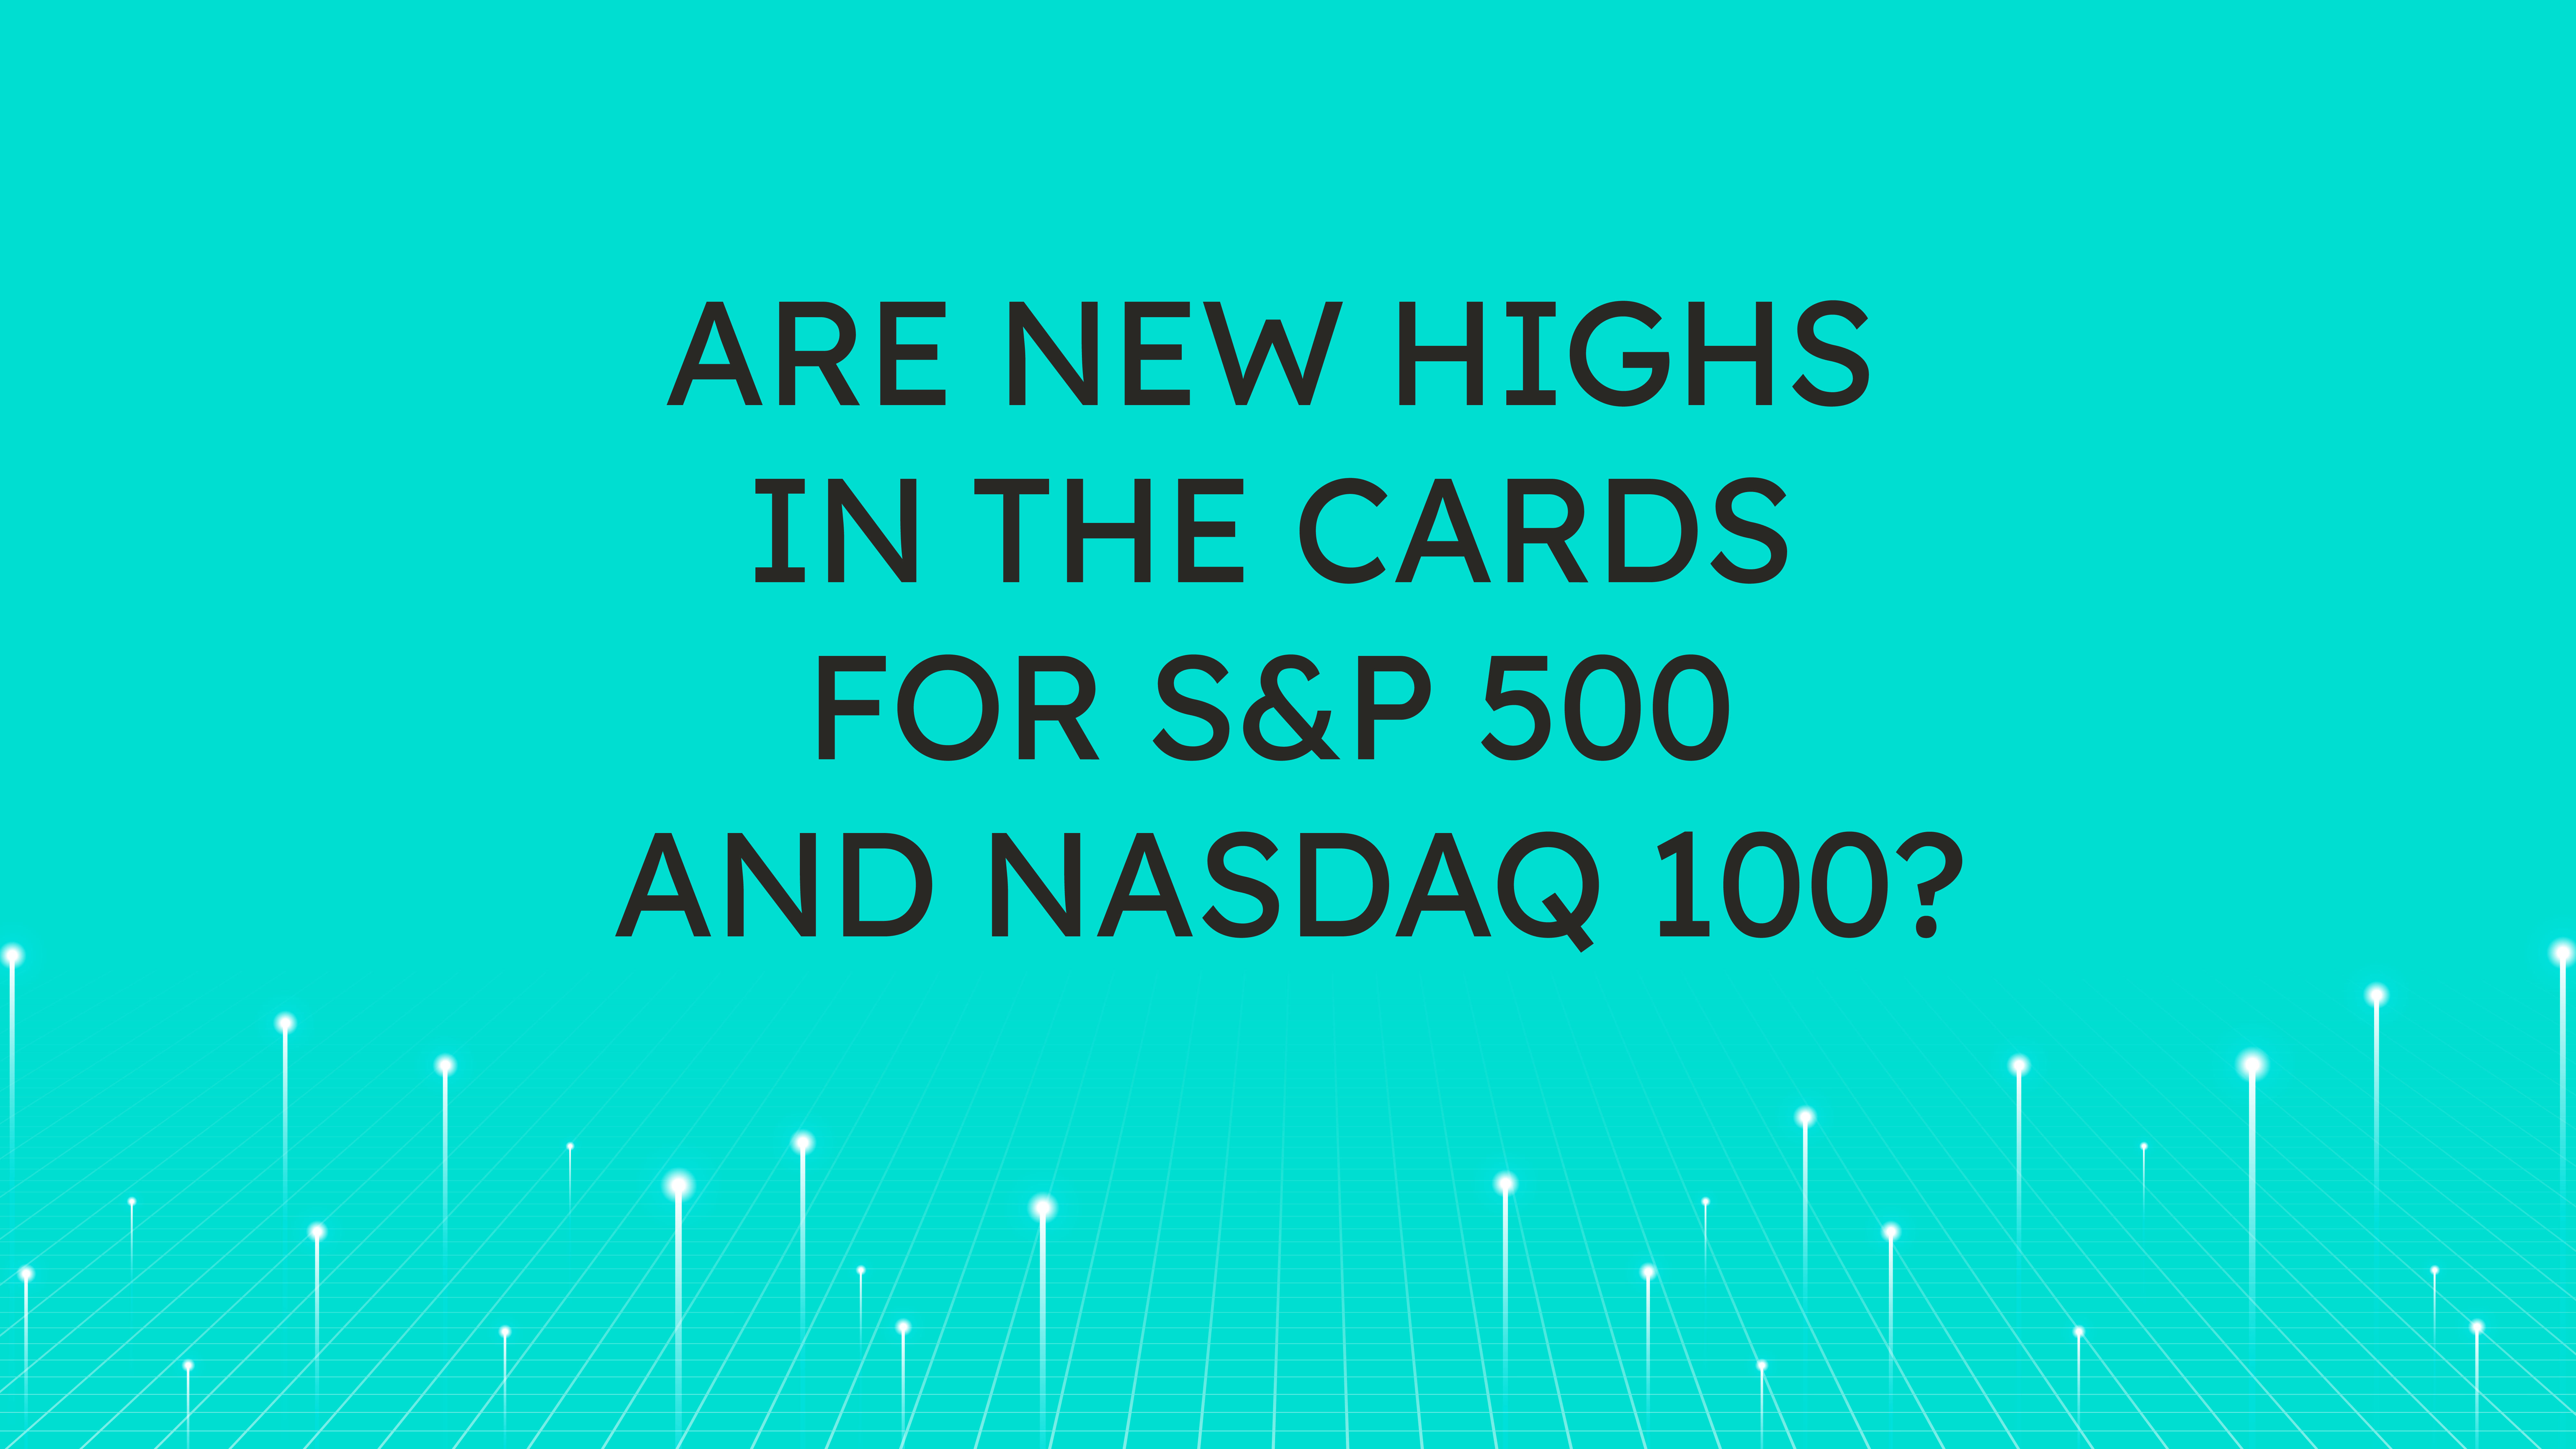 Are New Highs in the Cards  for S&P 500 and NASDAQ 100?